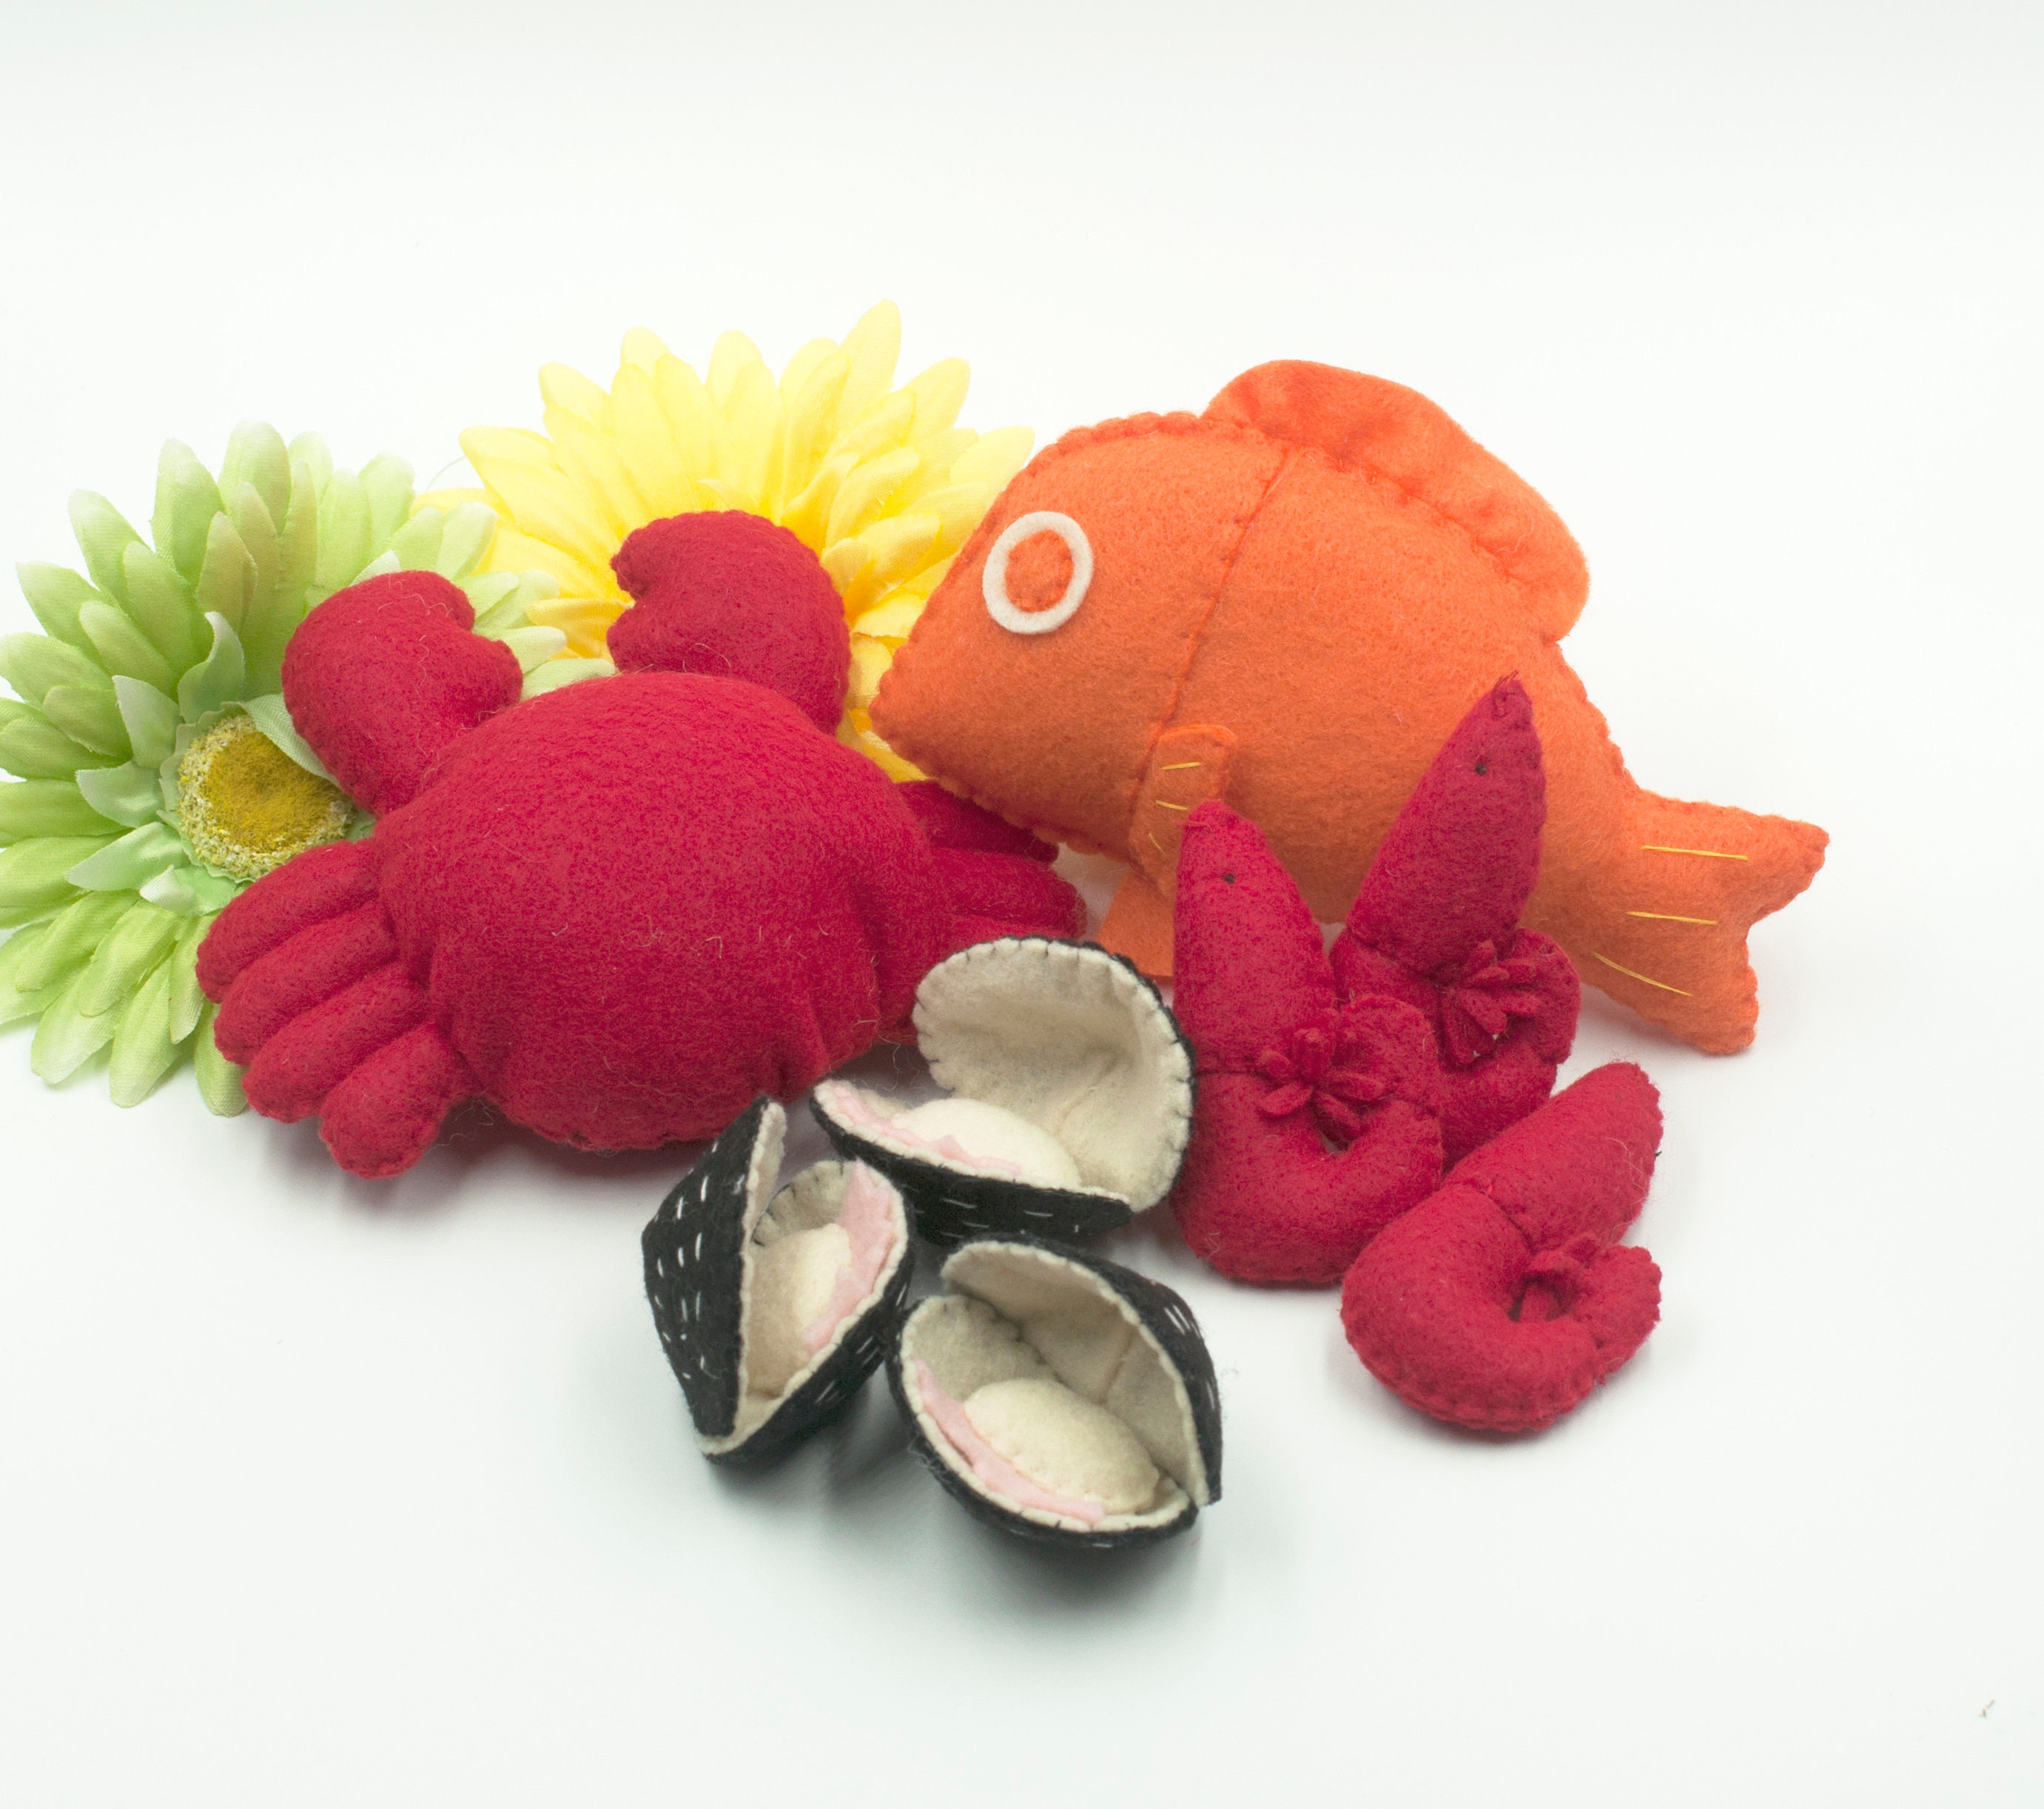 Felt Food Seafood Set, Play Food, Pretend For Play, Play Kitchen